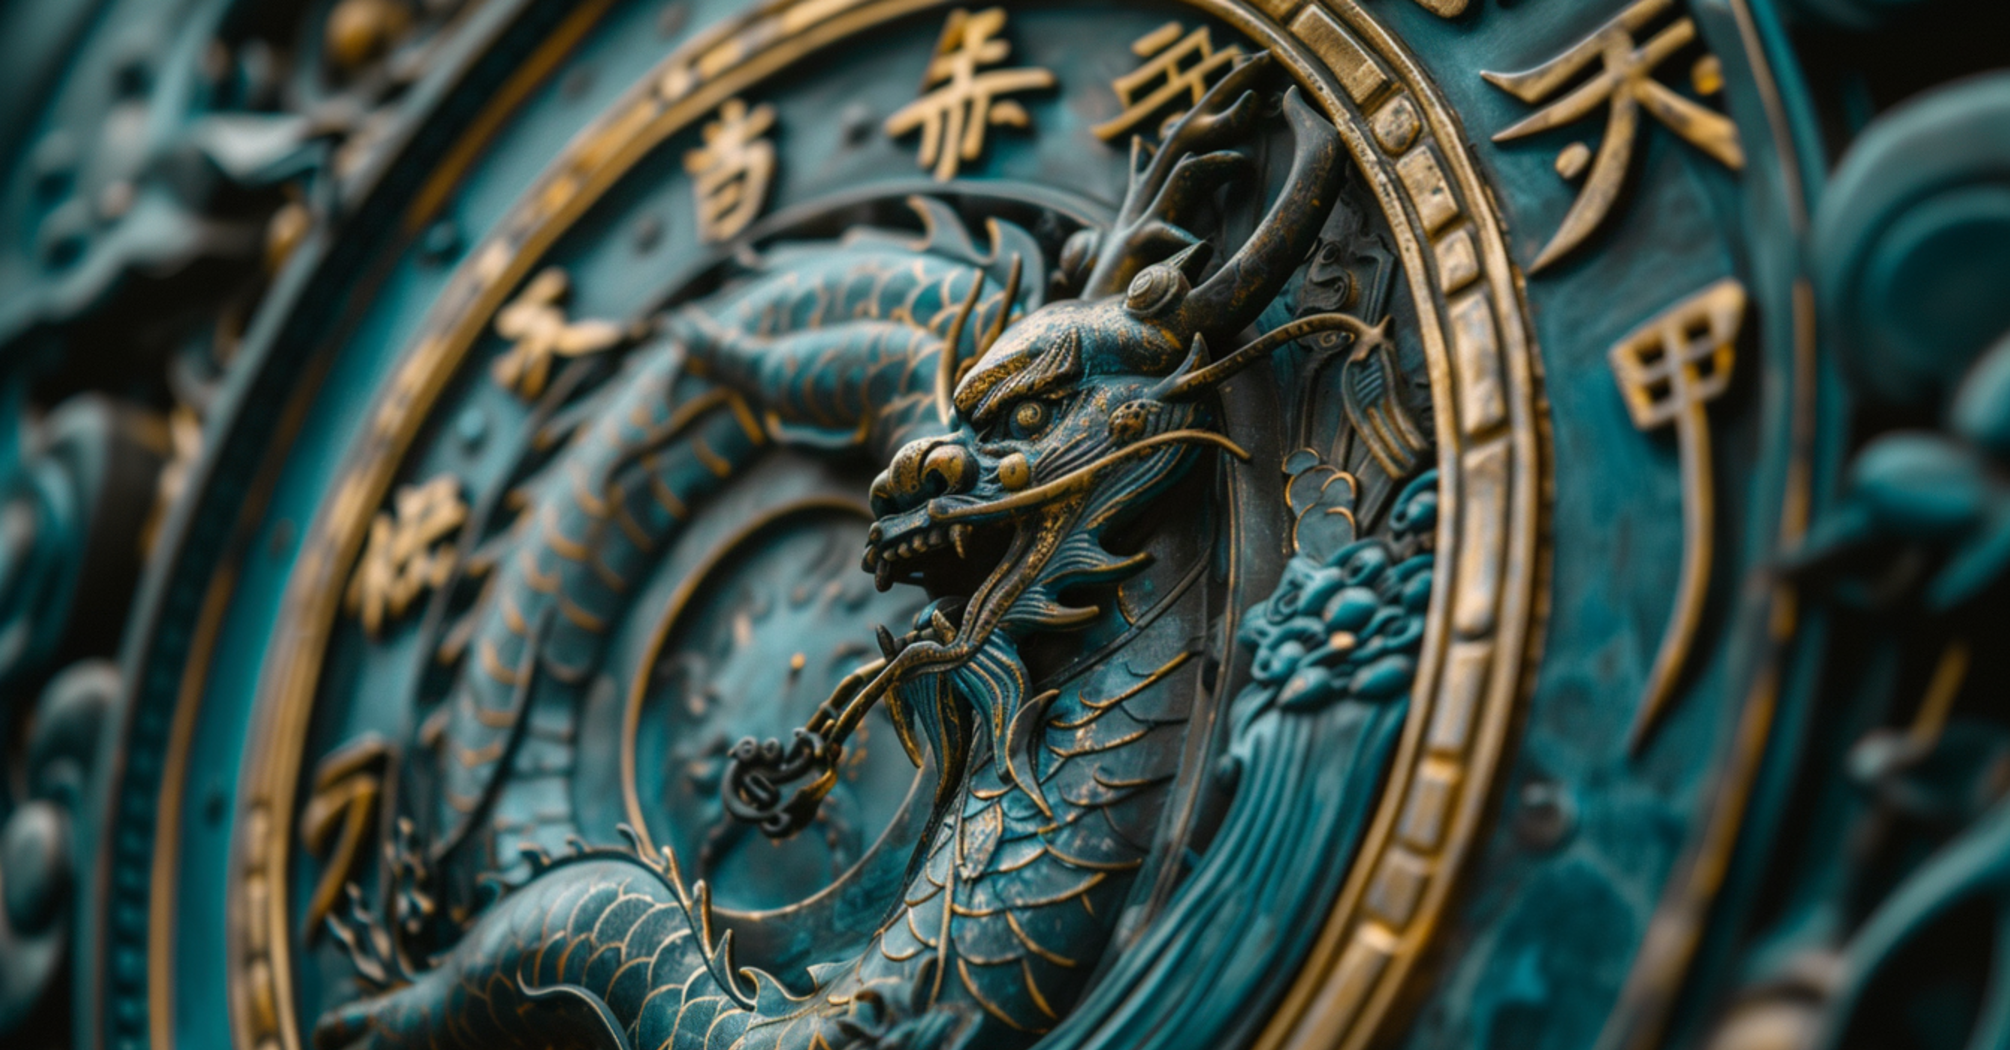 A day of self-reflection and growth: Chinese horoscope for June 6